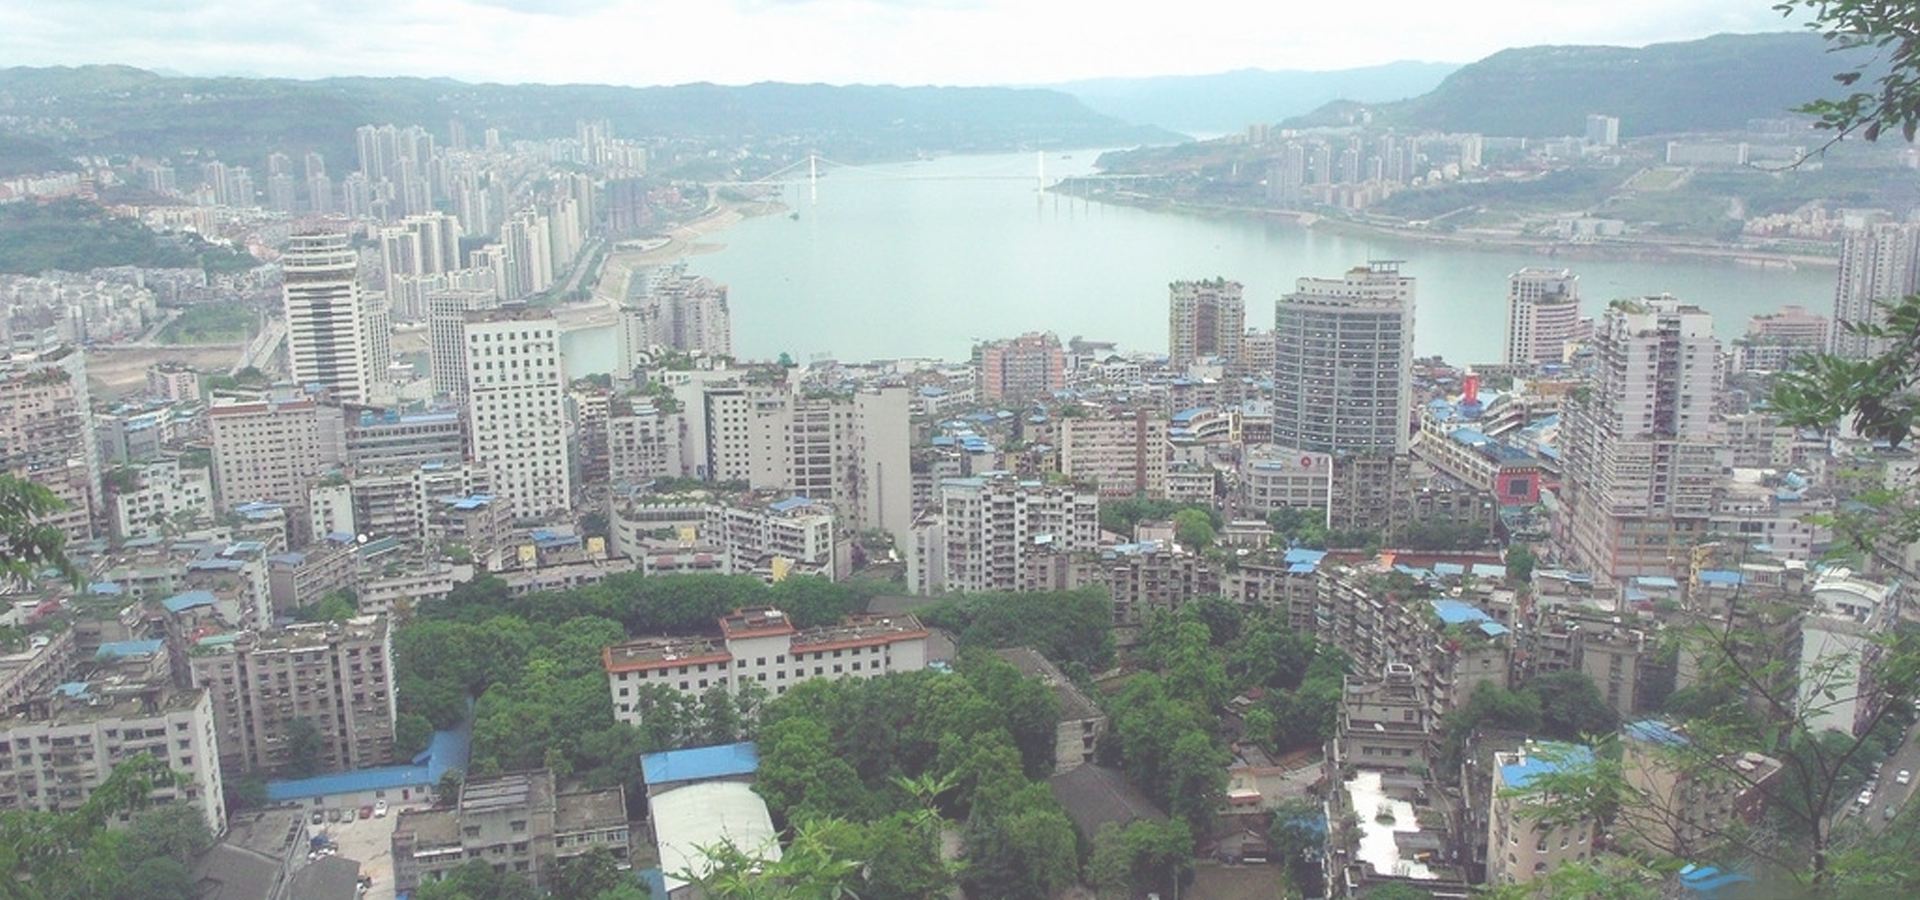 The Yangtze River / Three Gorges reservoir at Wanzhou